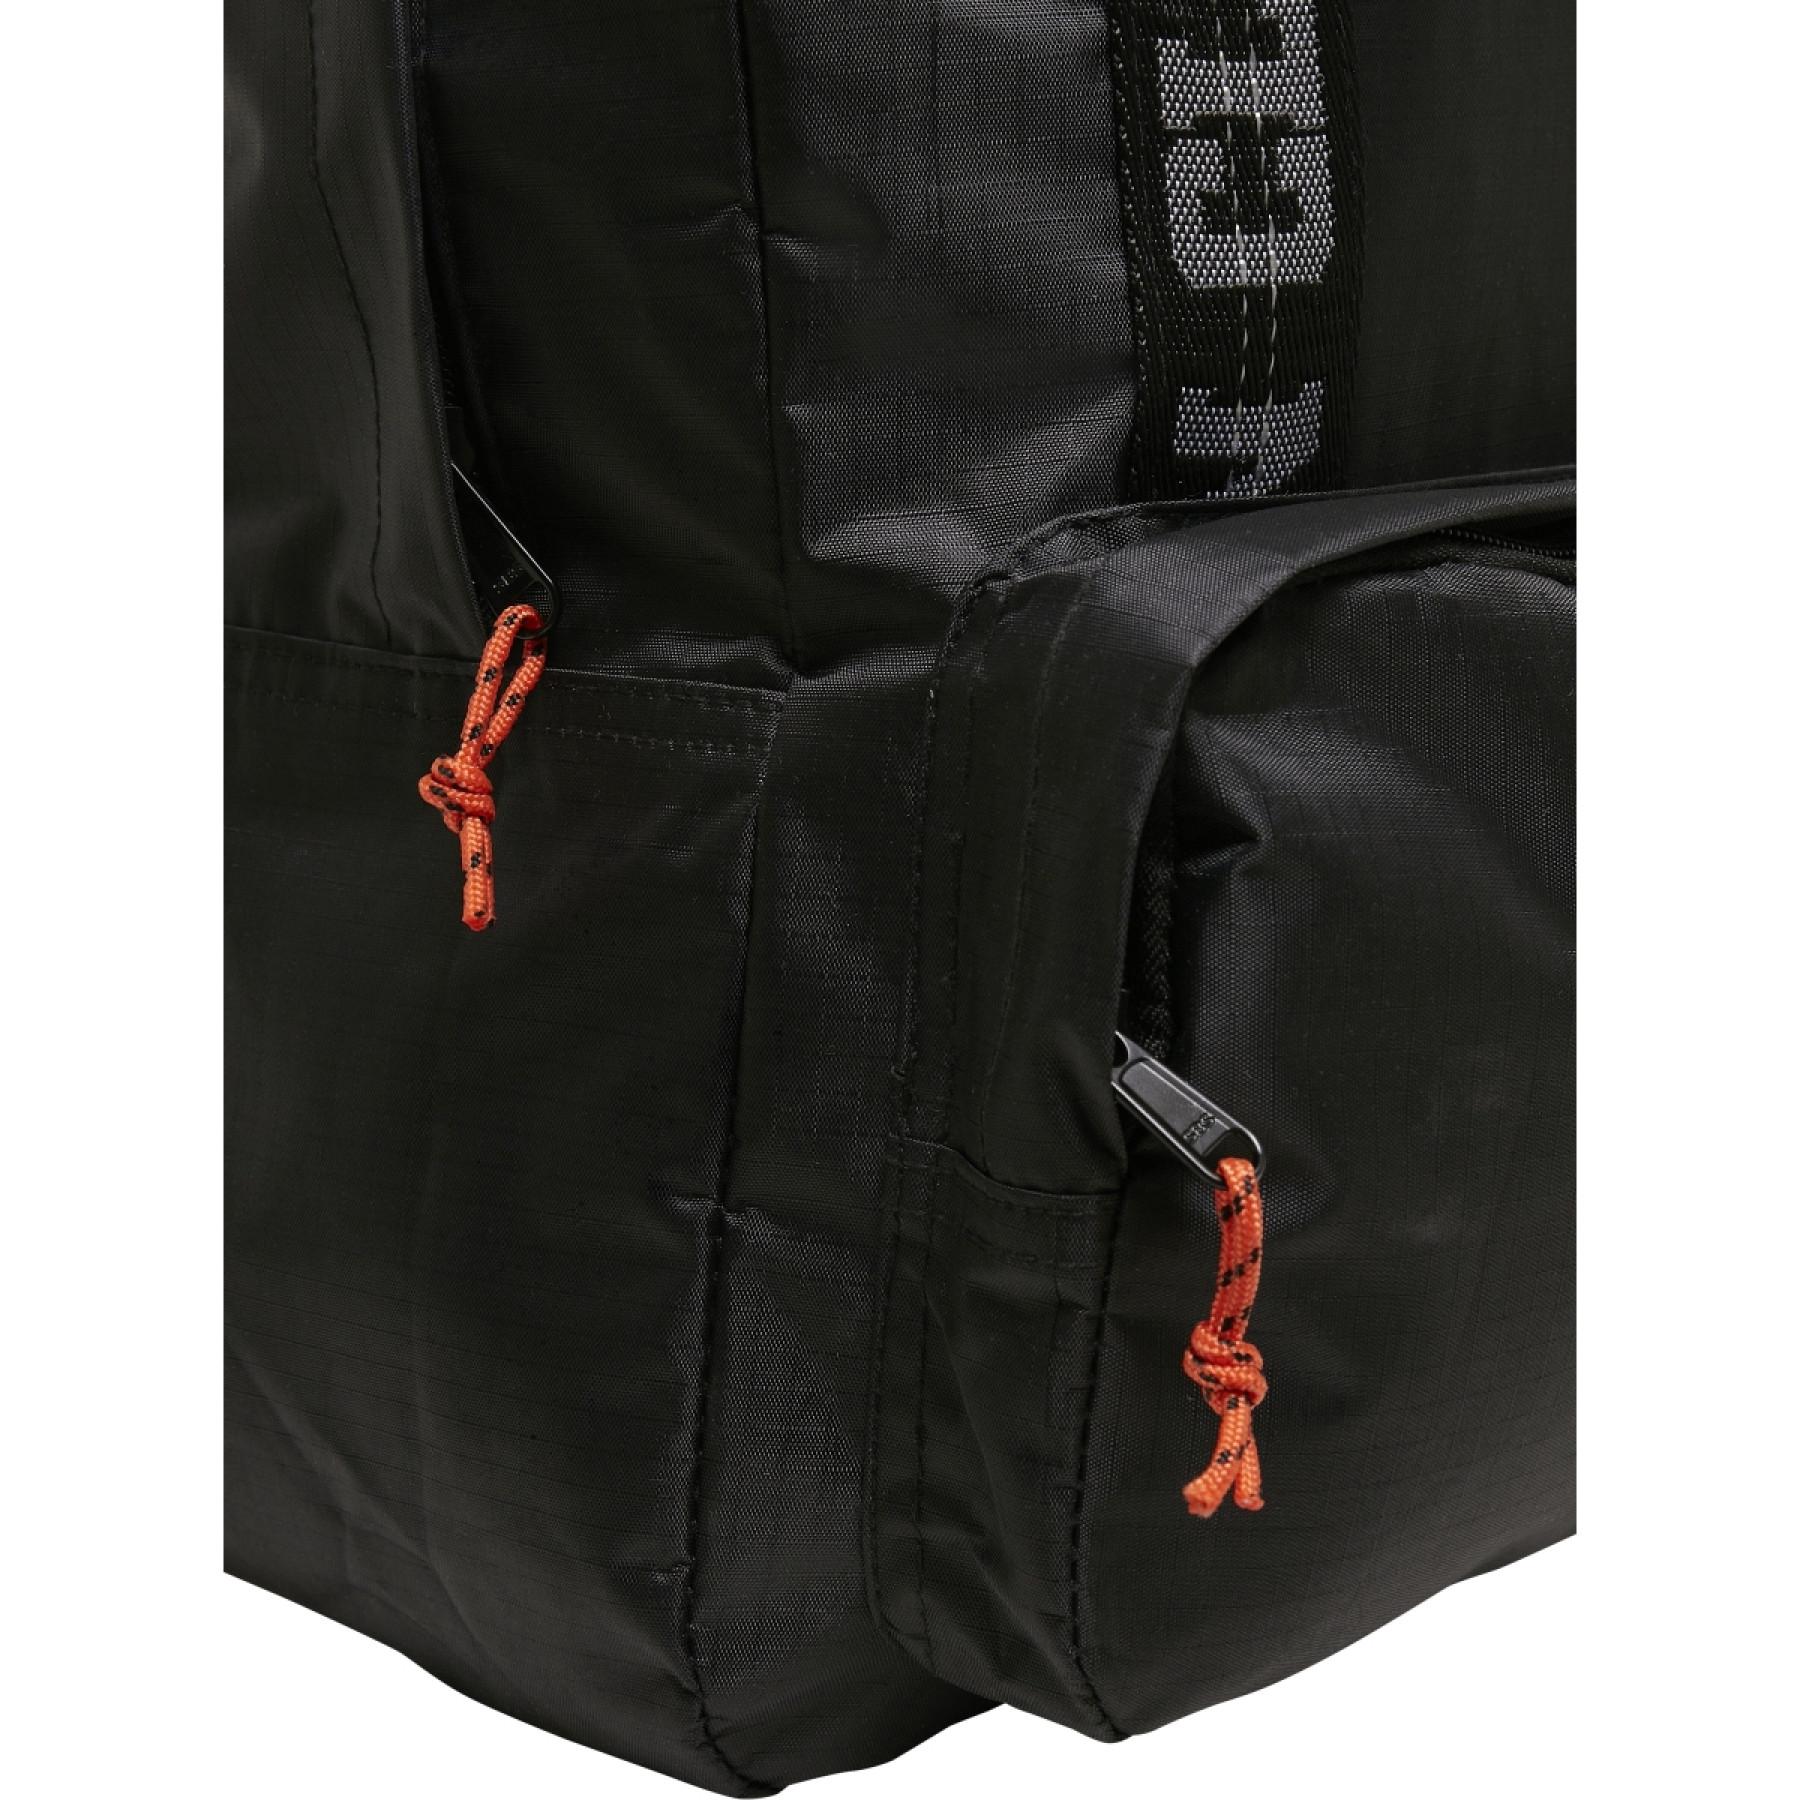 Backpack Urban Classics recyclable ribstop